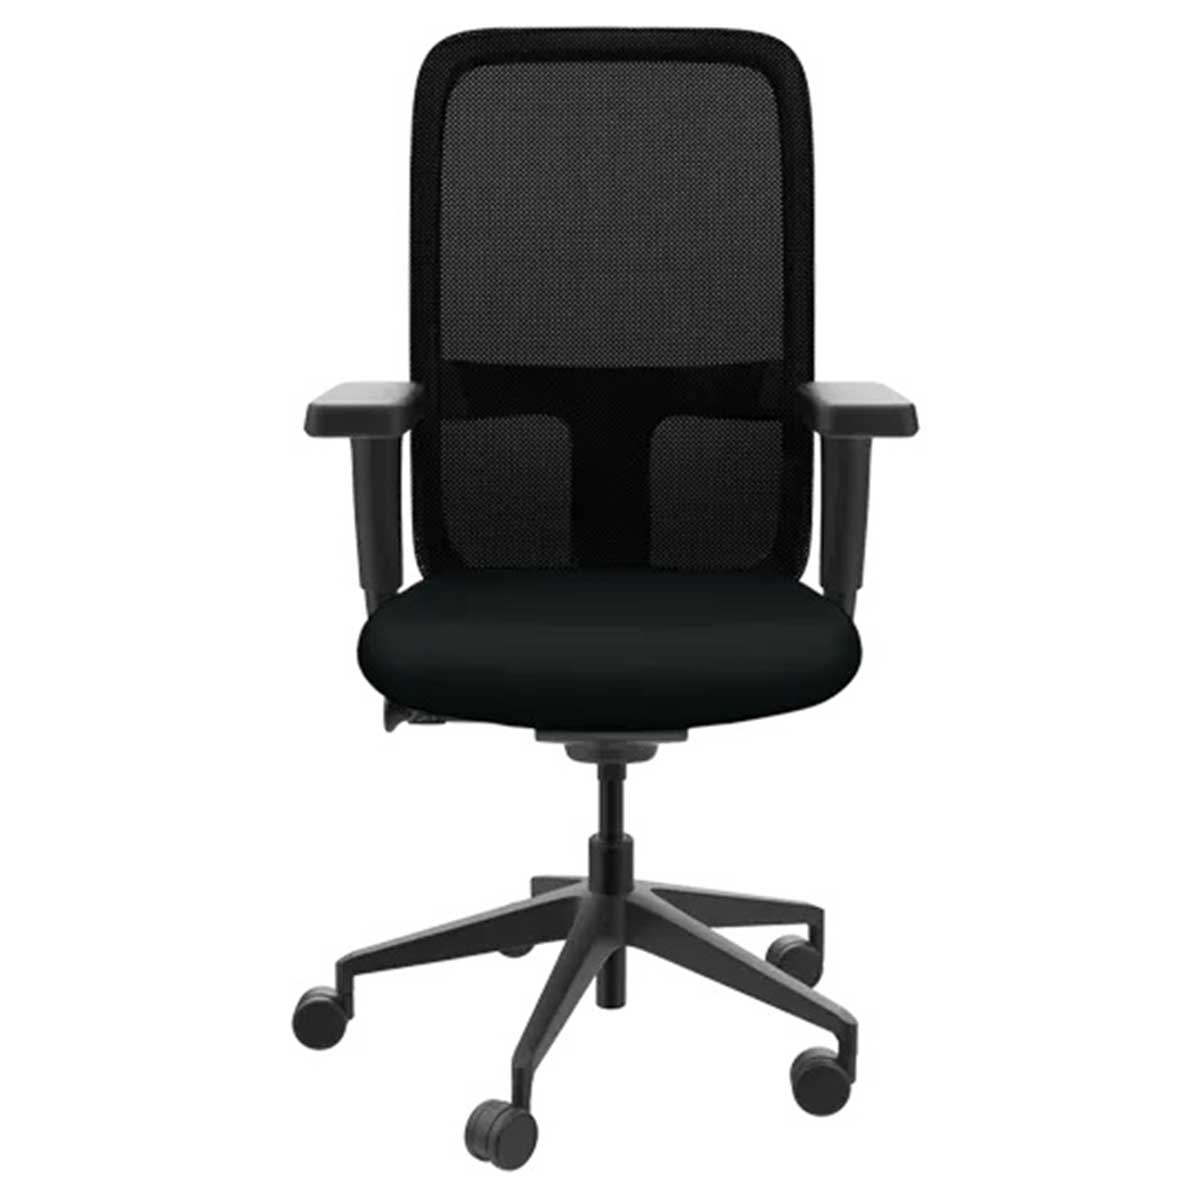 Revolving Chair Manufacturers, Suppliers, Exporters in Delhi 